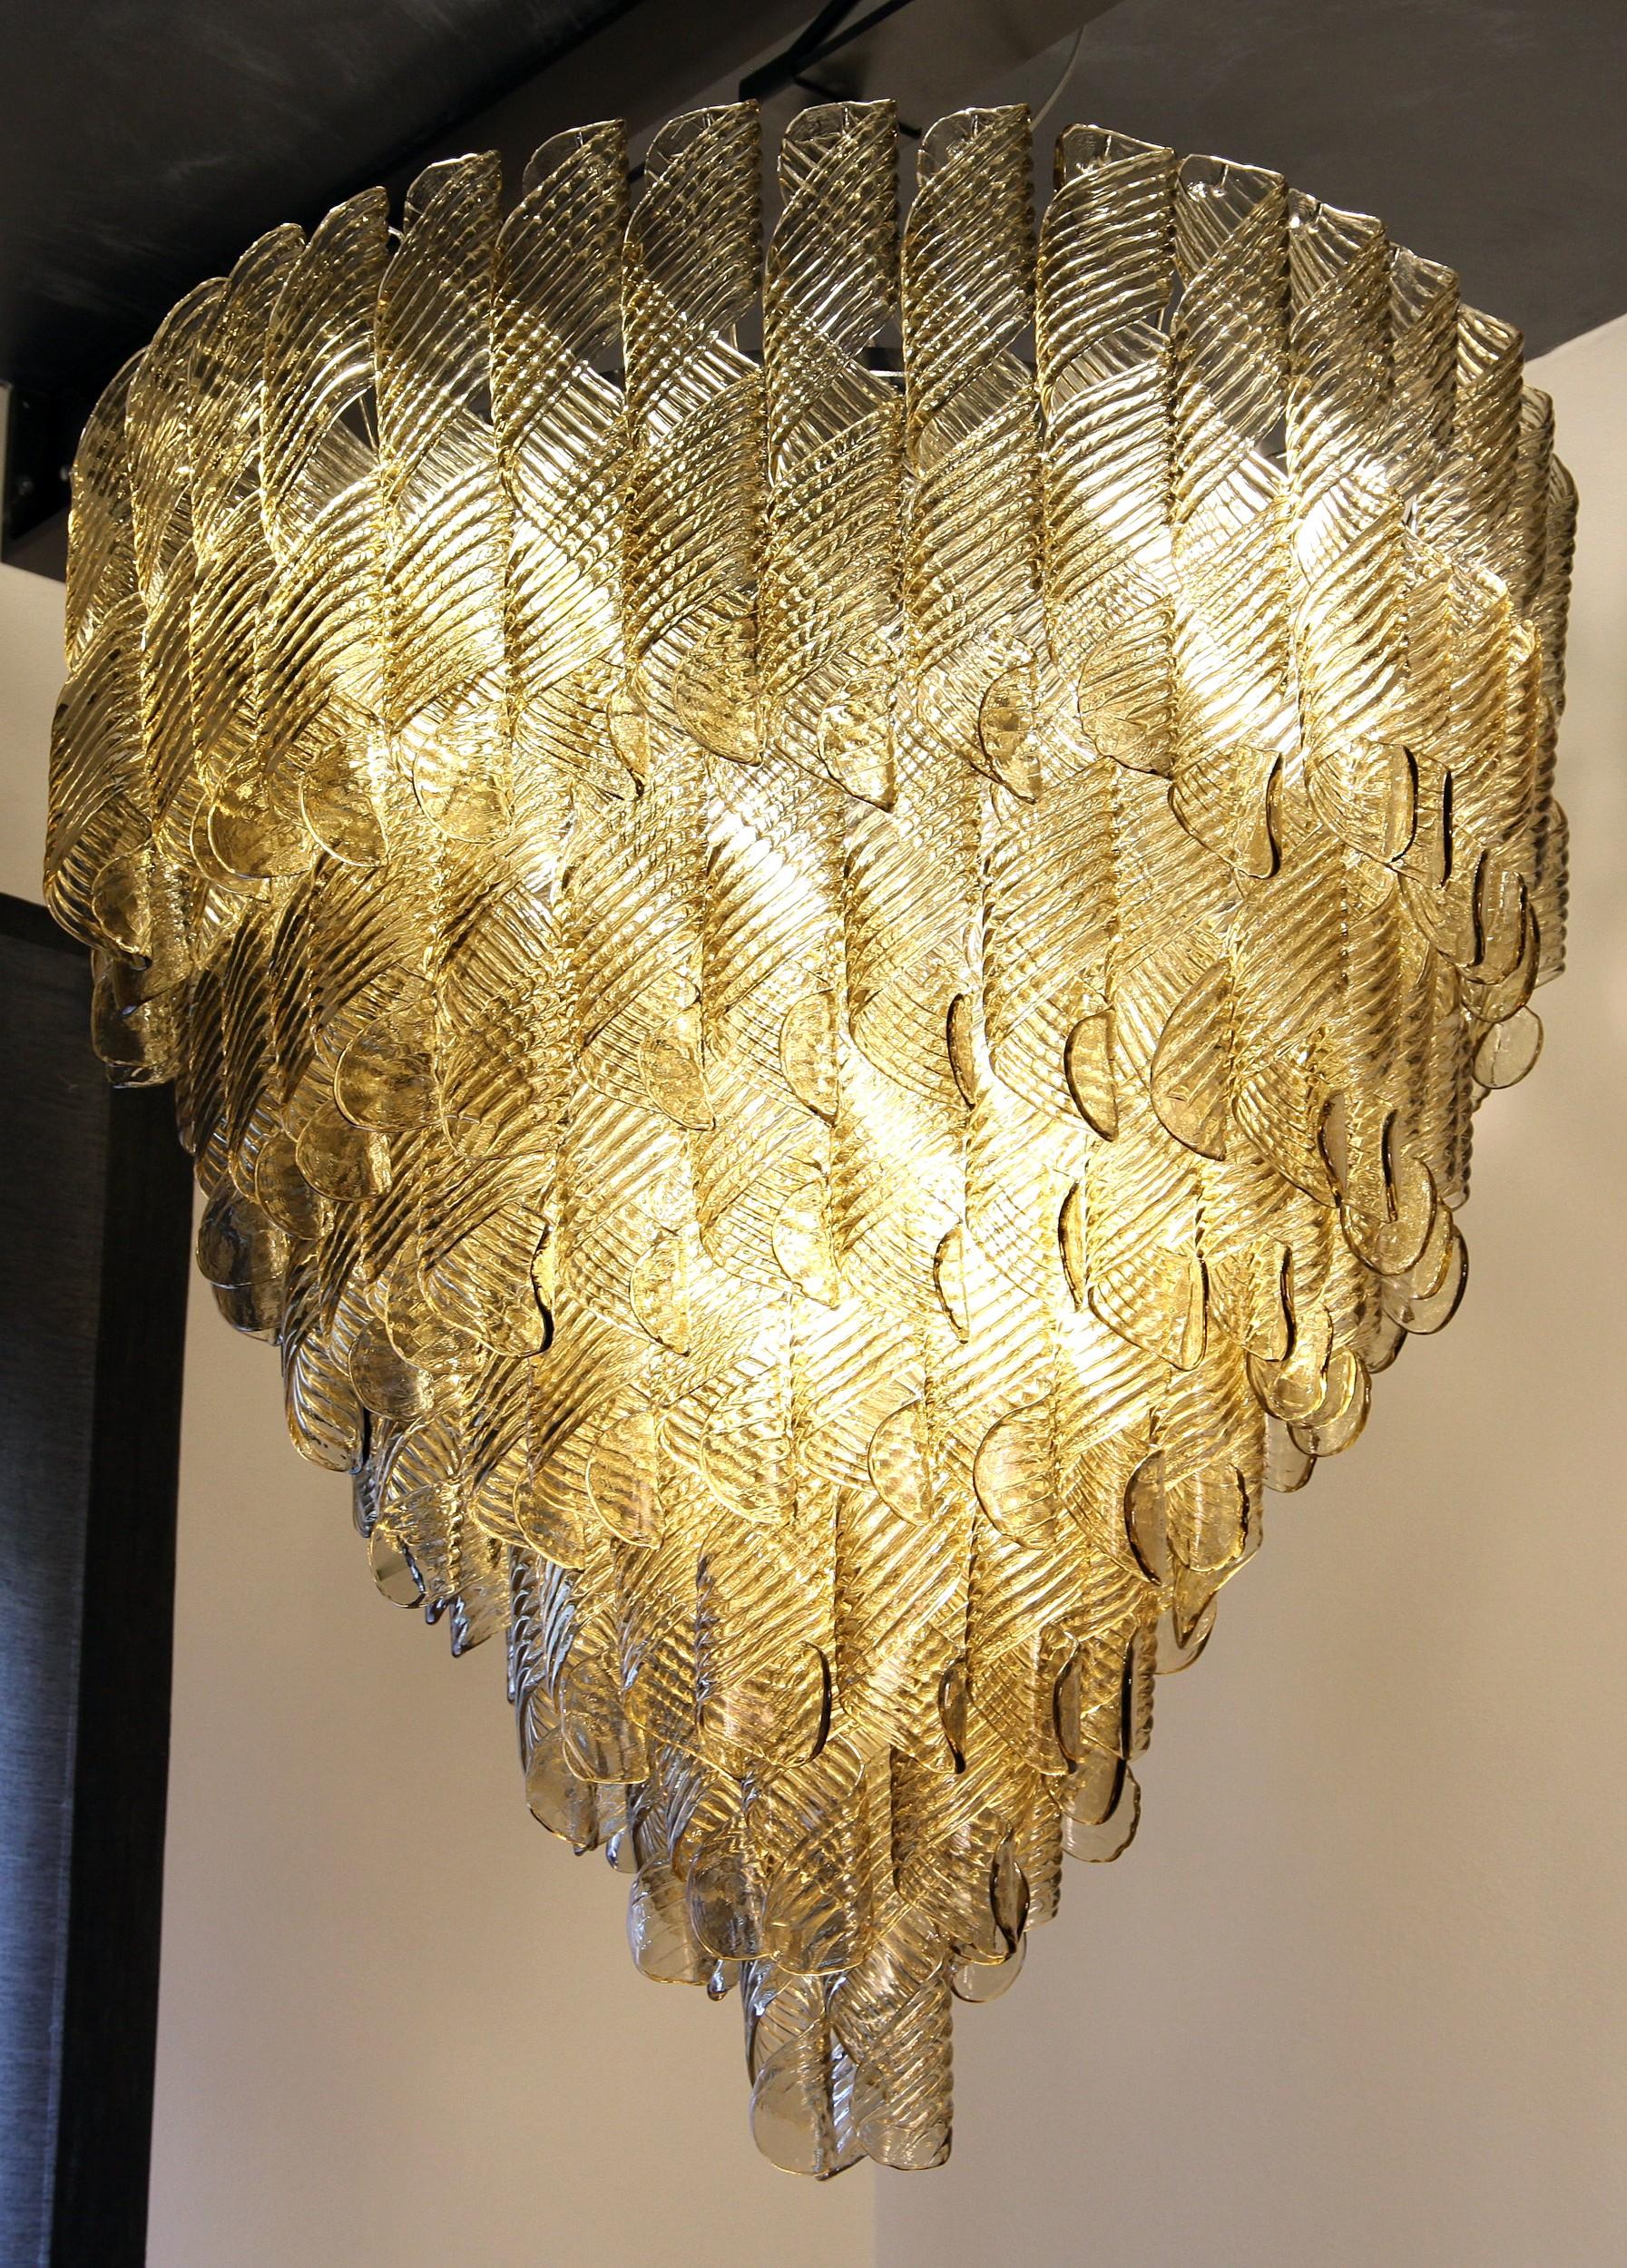 Large Chandelier, Murano Light Fume Glass in Oval Spiral Ribbed Elements 7 Tiers 7